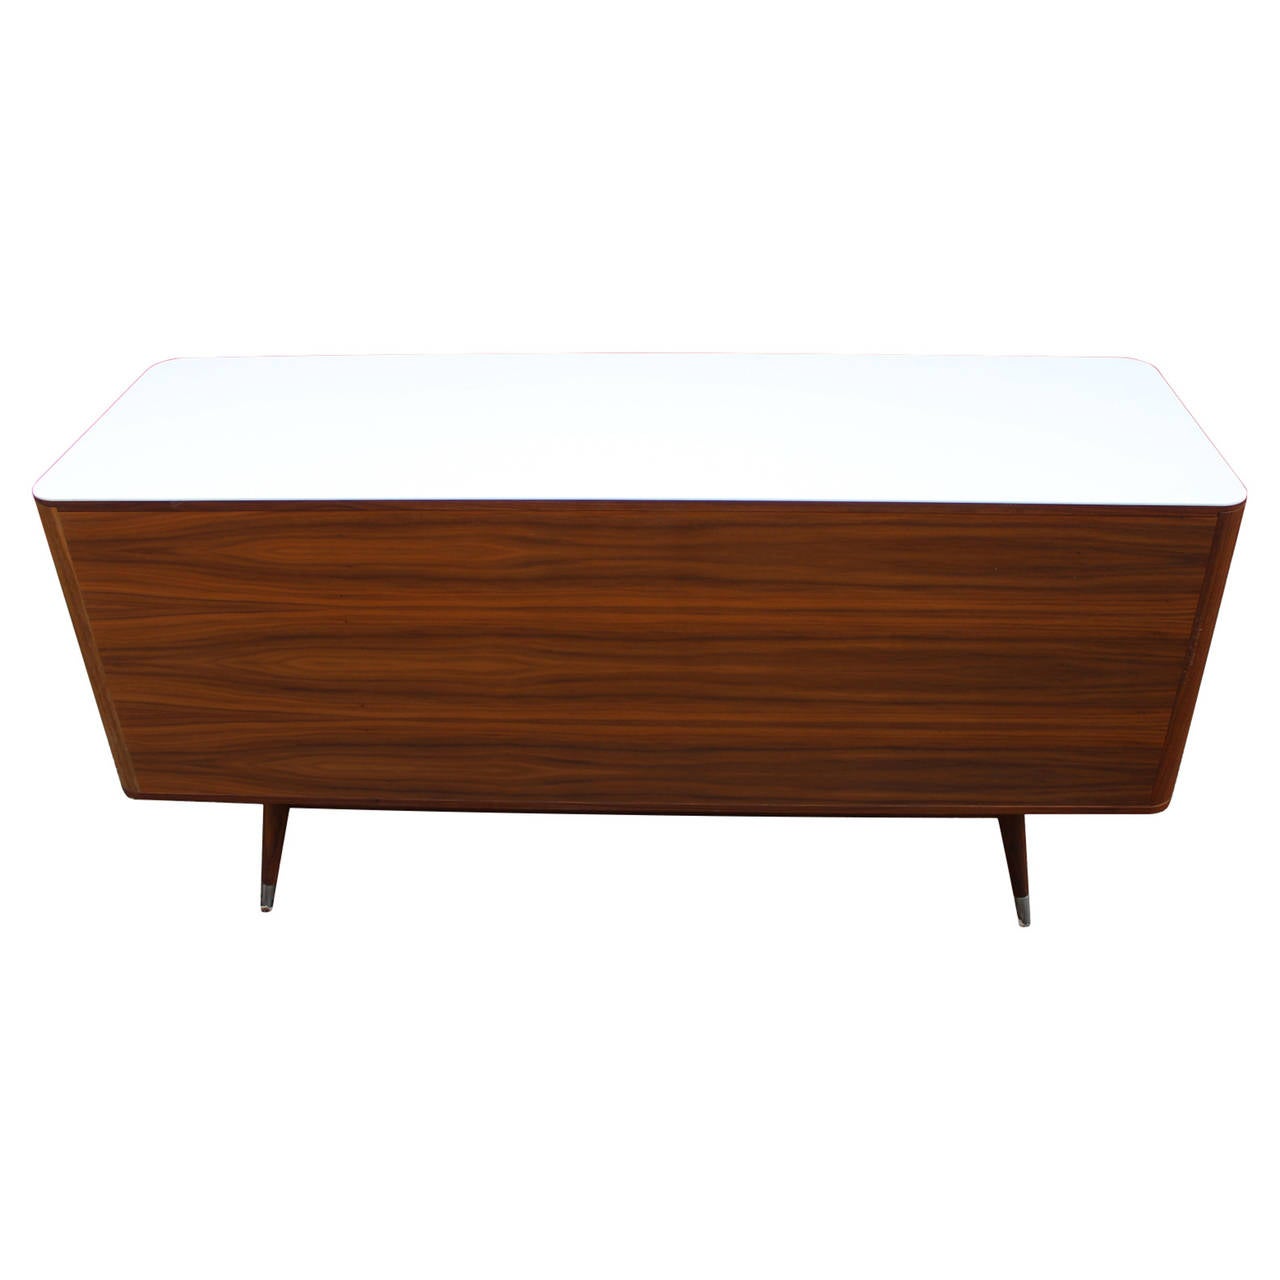 A Naver sideboard model AK 2630-2660 circa 2014, designed by Nissen and Gehl. The Sideboard is light, elegant and with a practical White corian top. The sideboard is made of walnut.